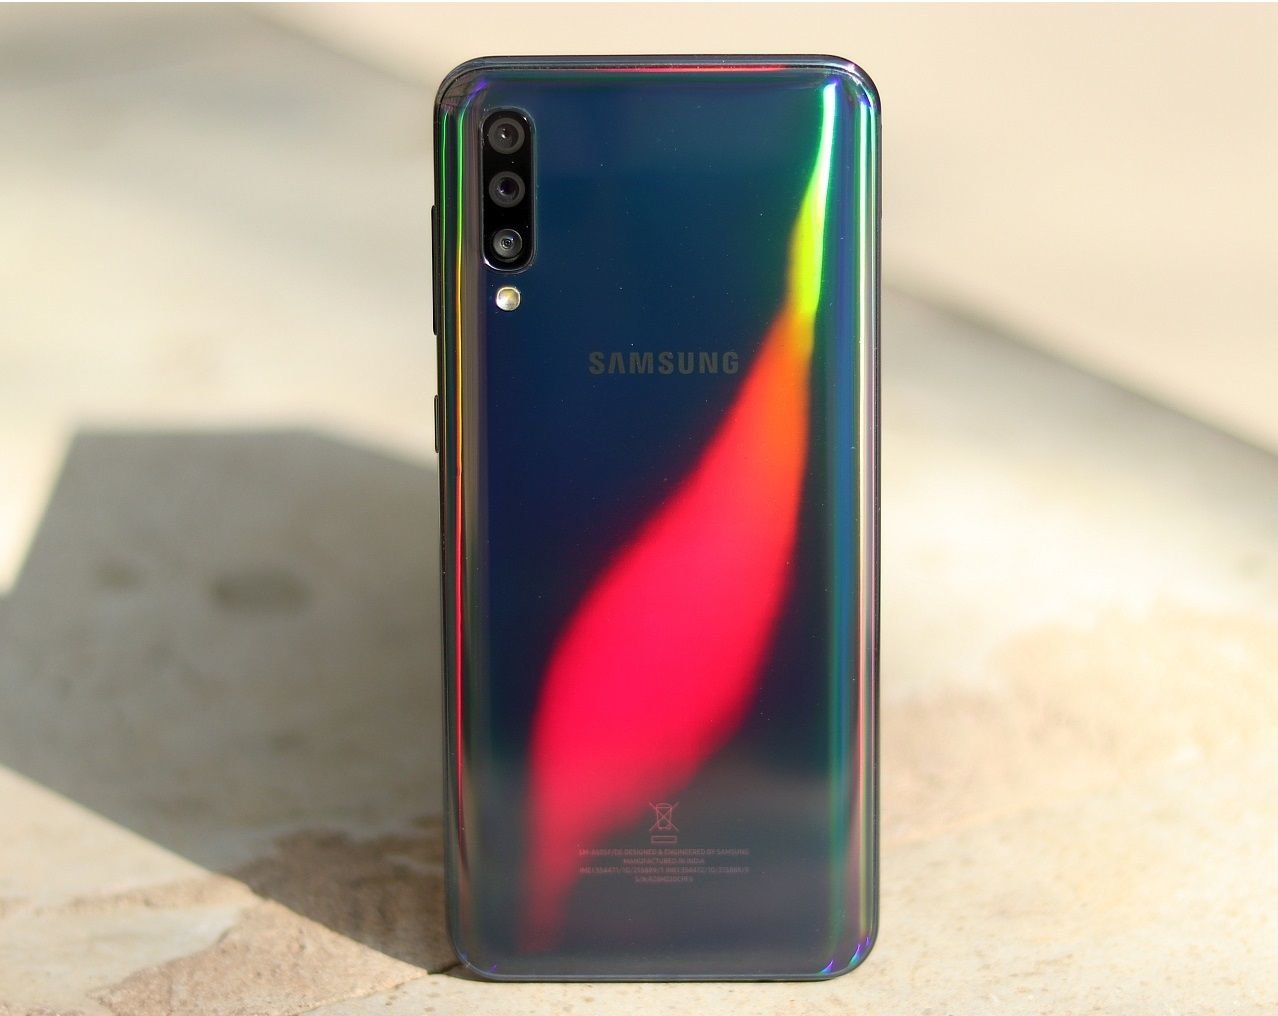 One UI 2.0 based on Android 10 headed to Samsung Galaxy A50 | DroidAfrica